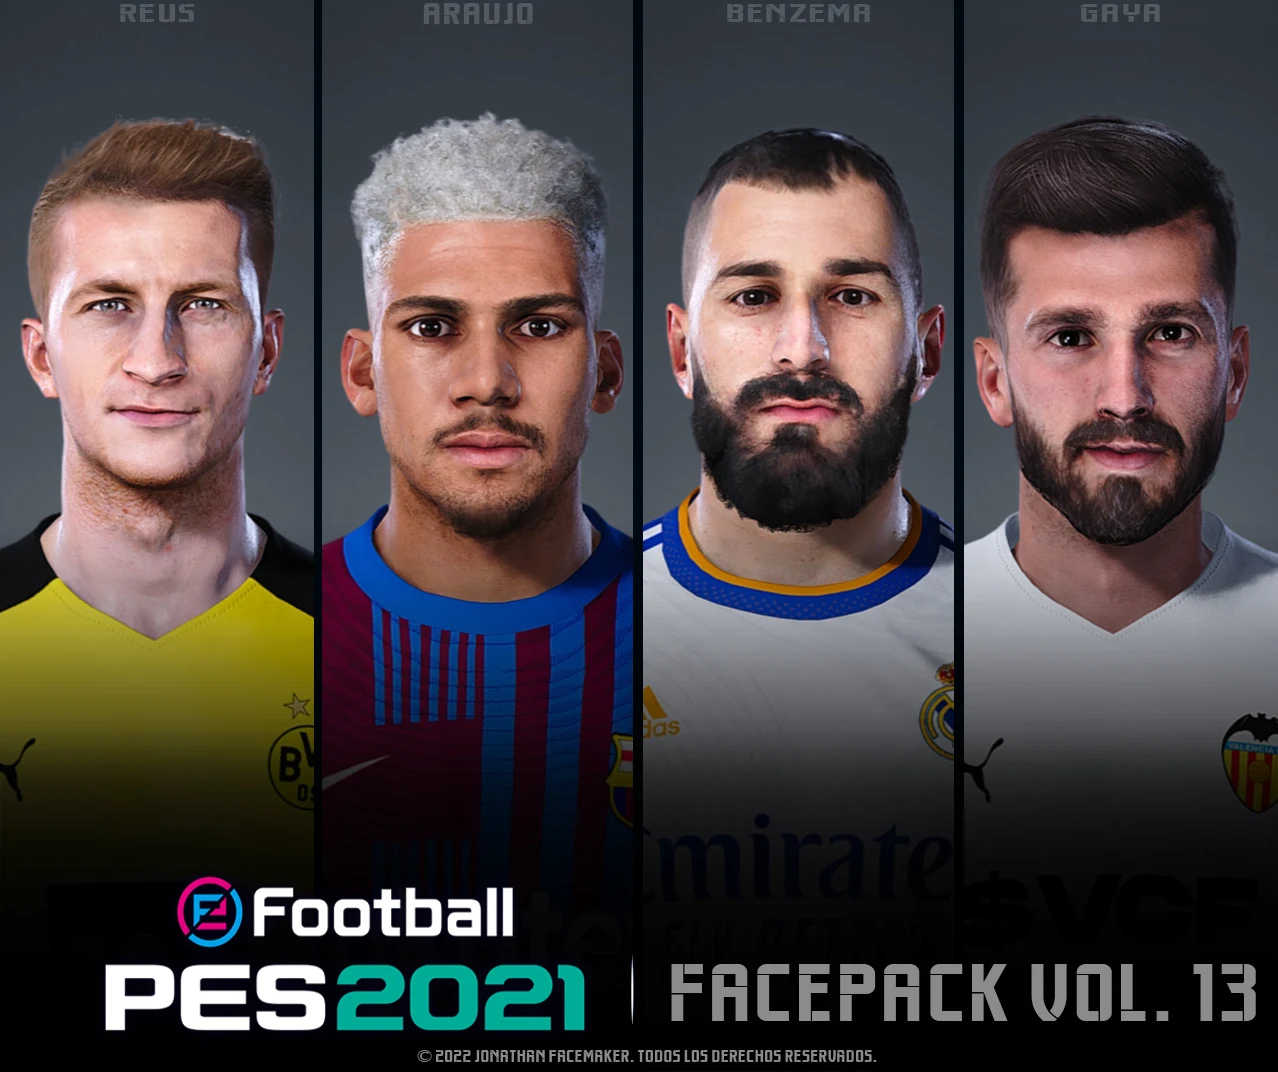 PES 2021 Facepack Vol. 13 by Jonathan Facemaker